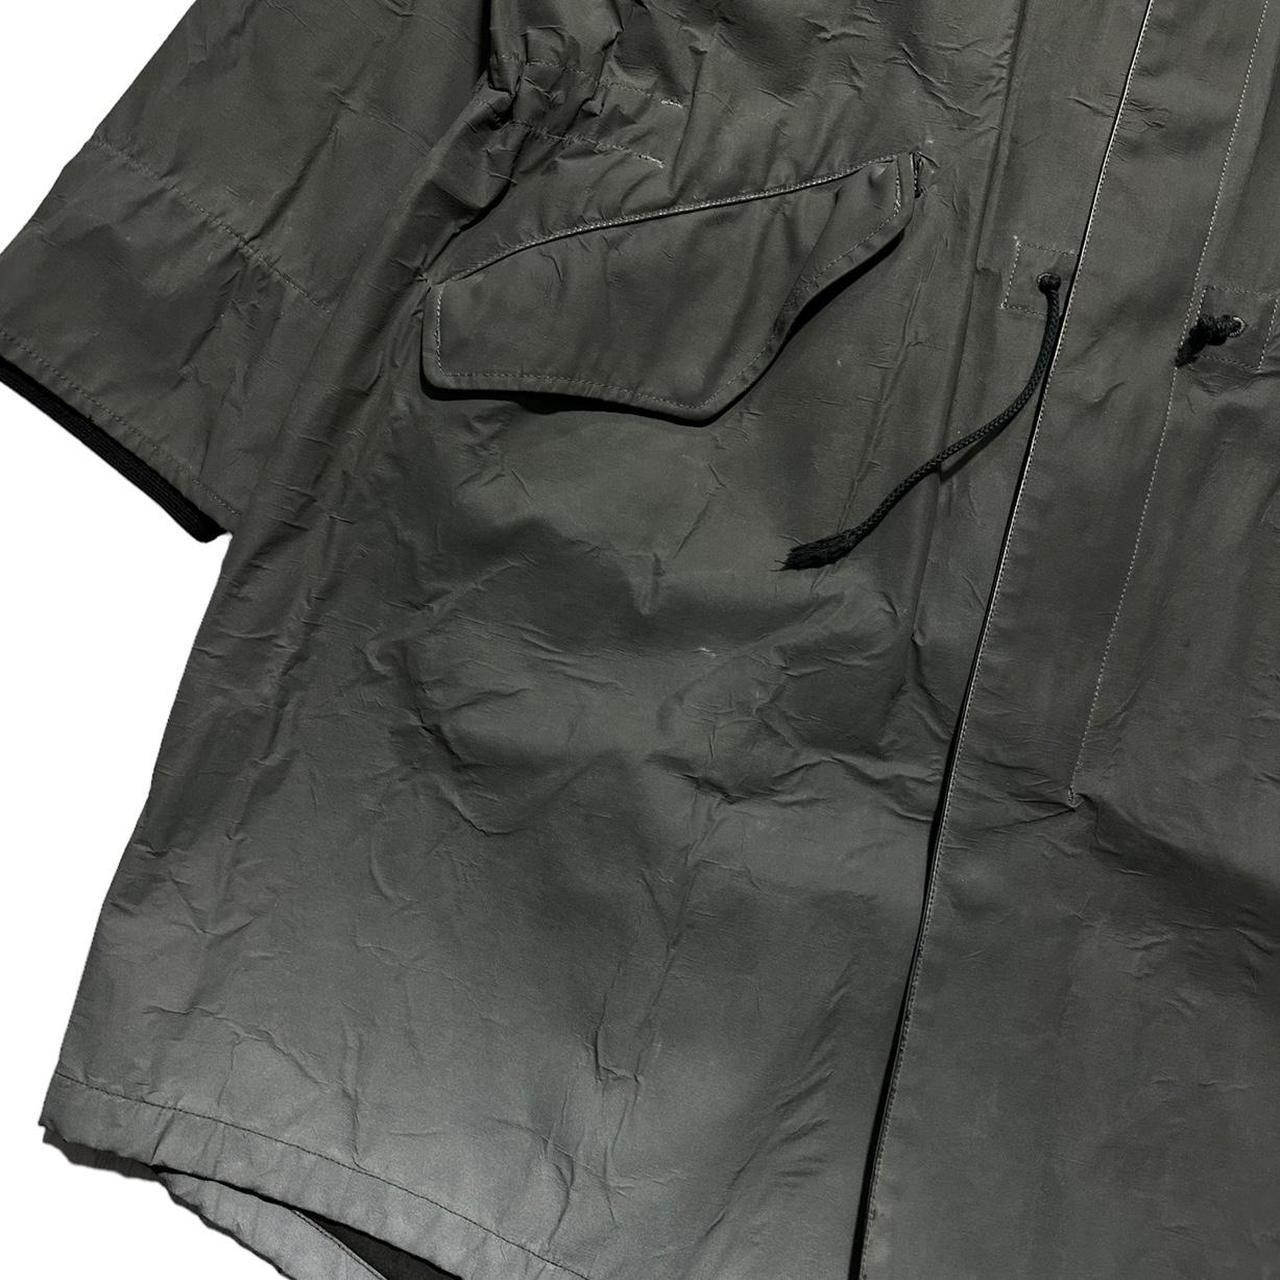 Stone Island Antique Reflective Parka - Known Source